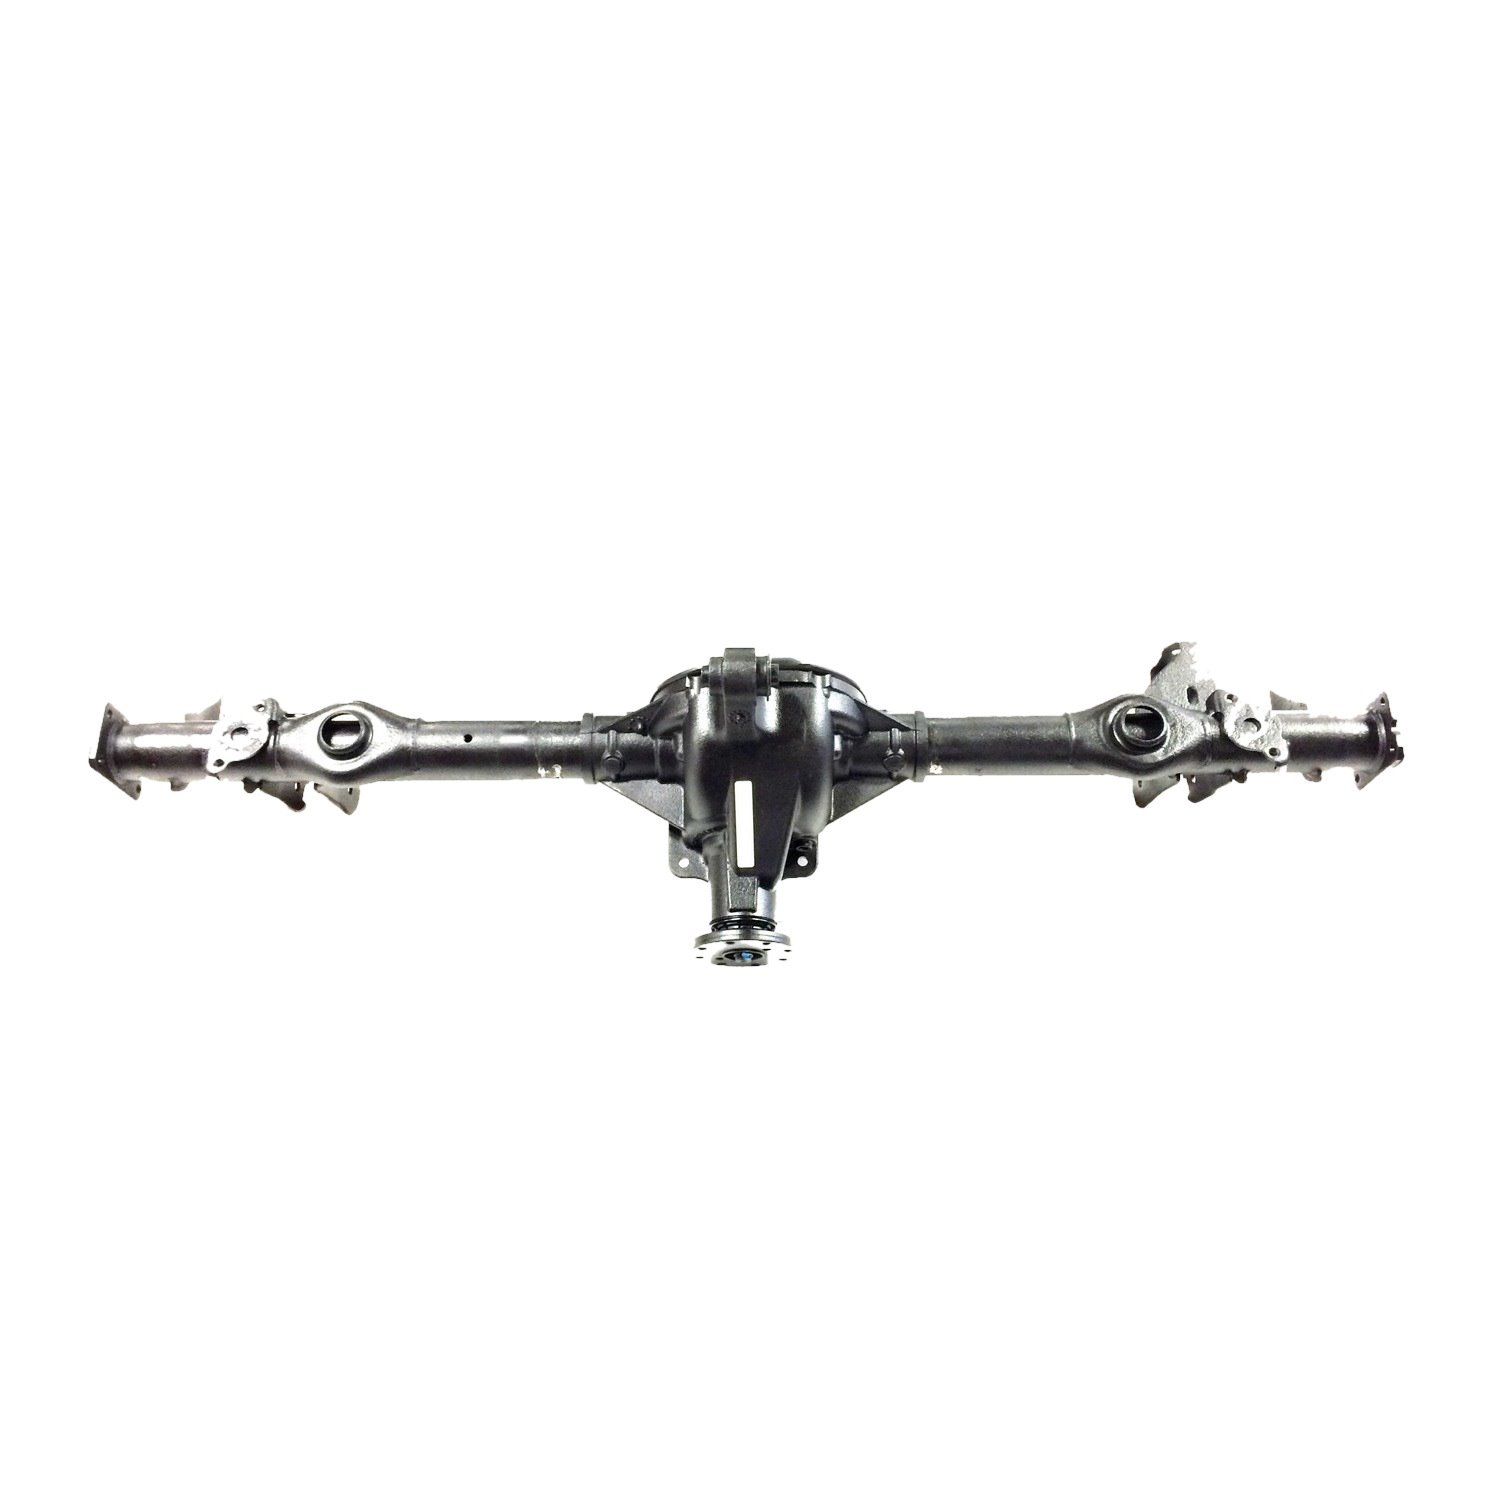 Remanufactured Front Differential for 1999-2004 Jeep Grand Cherokee 4.0L with 3:55 Gear Ratio